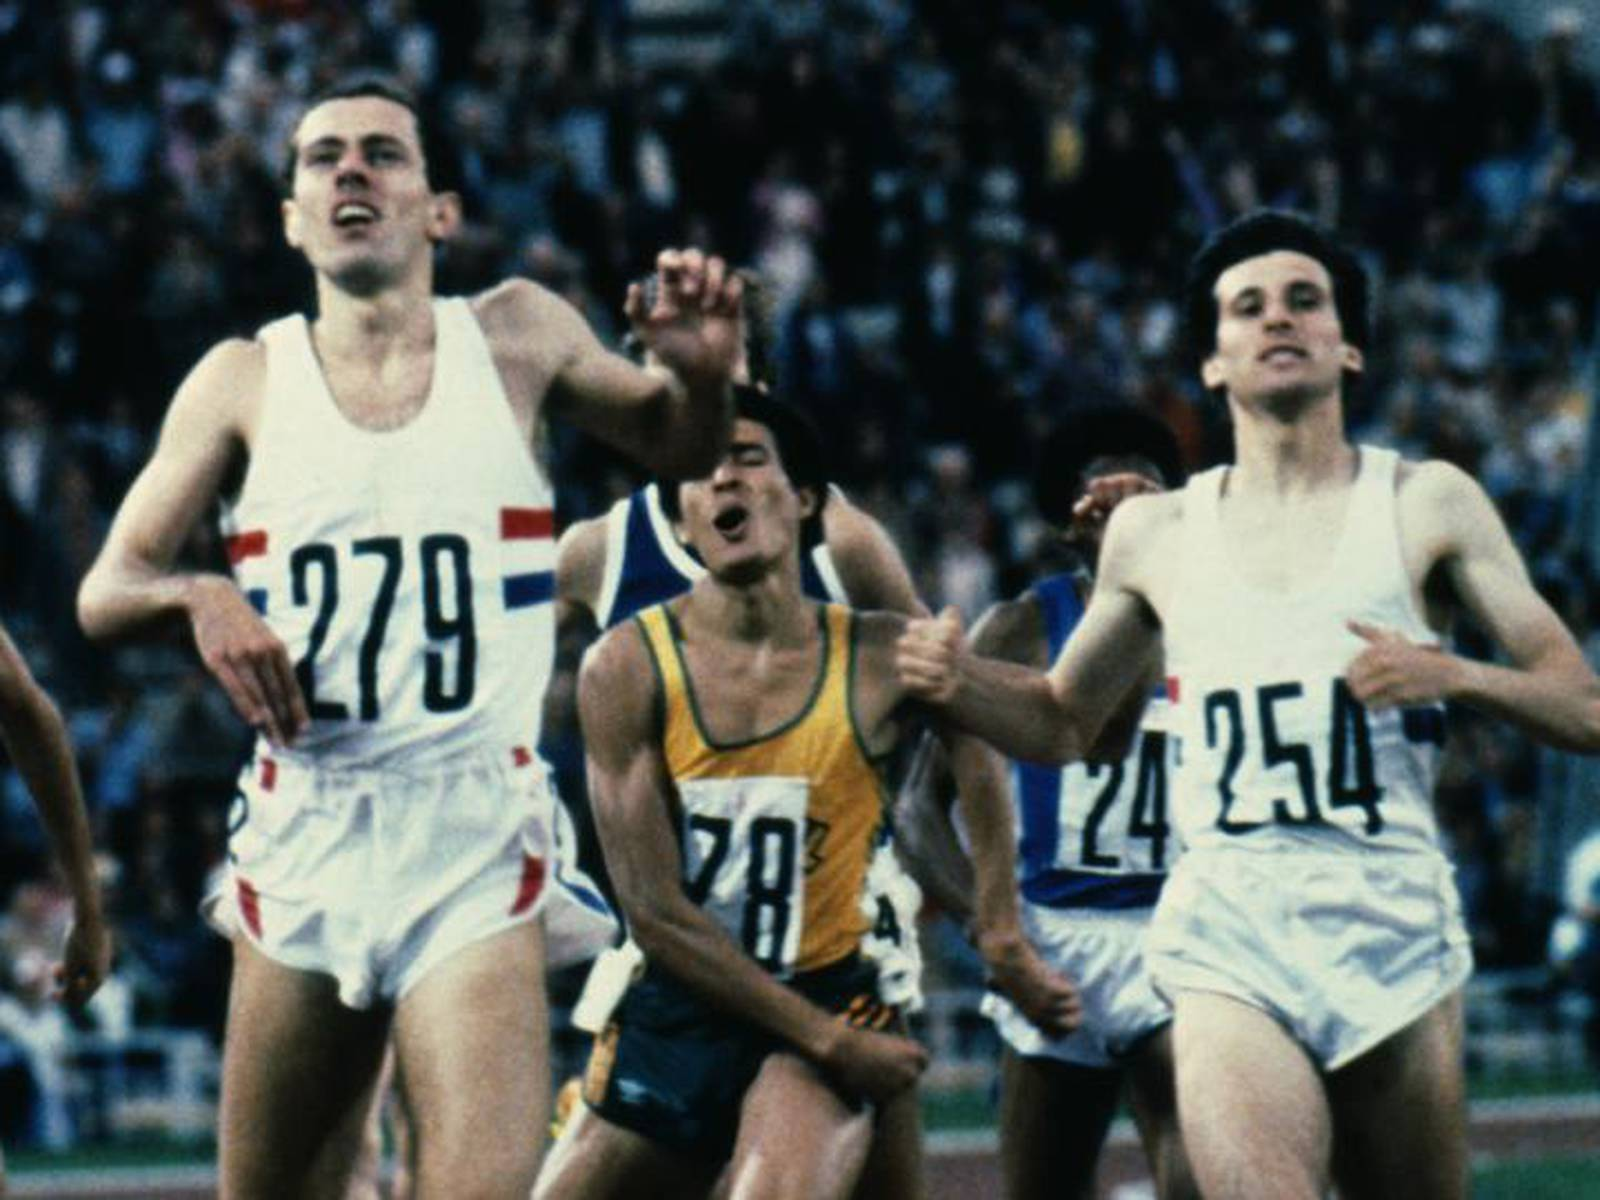 Steve Ovett, left, and Sebastian Coe, right, avoided each other outside the Olympics but their rivalry still helped raise interest in athletics ©Getty Images